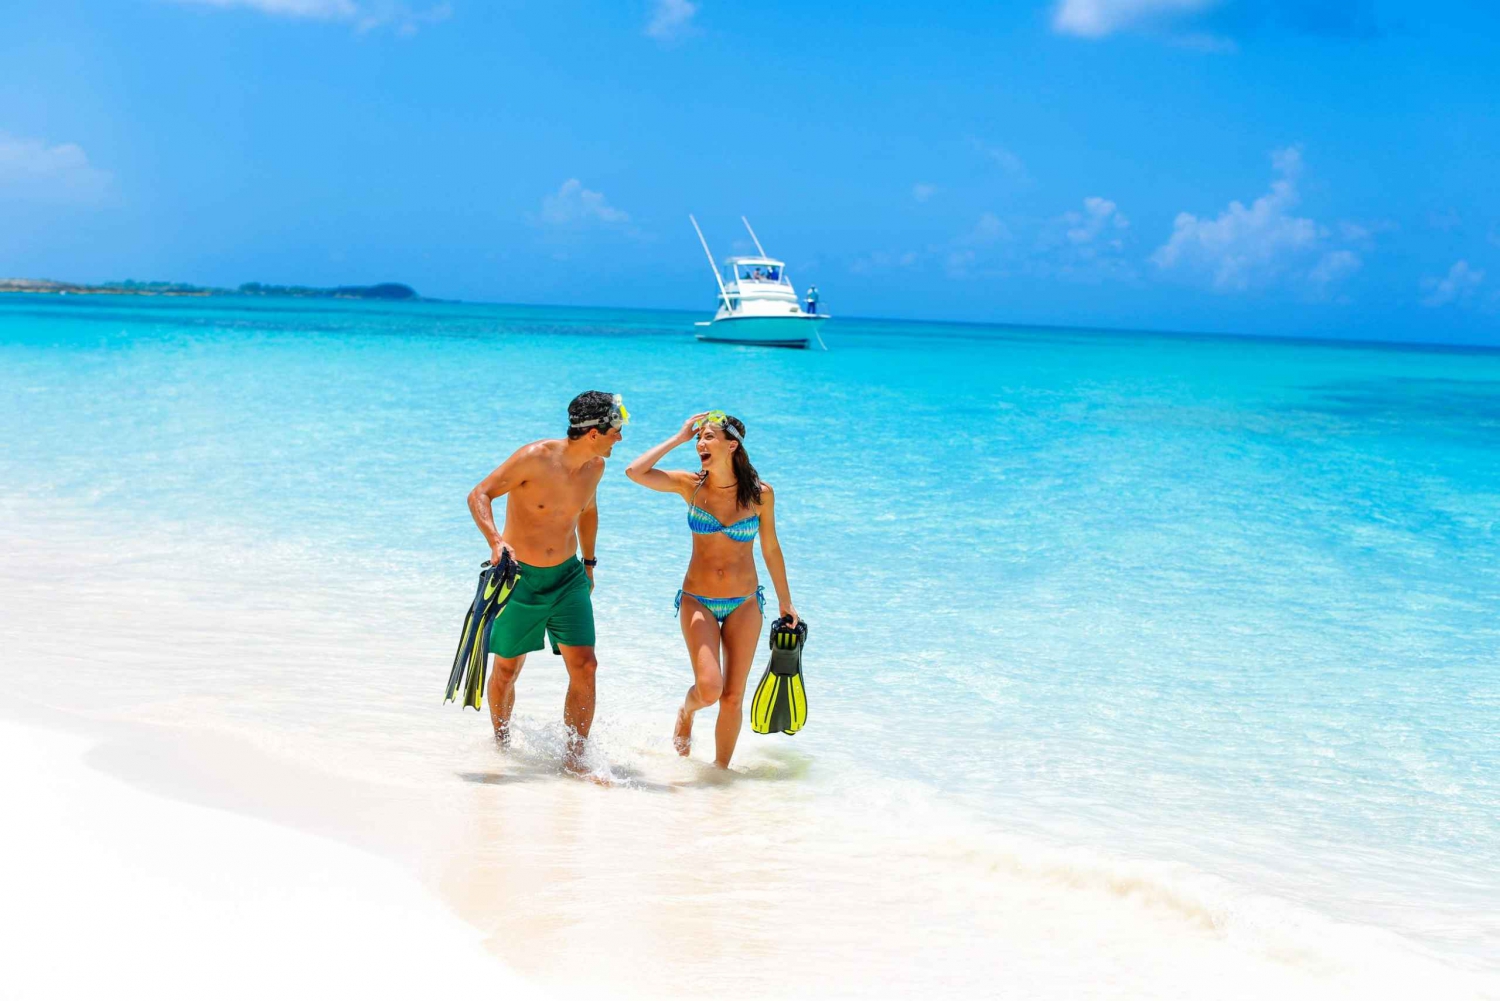 Bahamas: Full-Day Beach Excursion to Sandy Toes